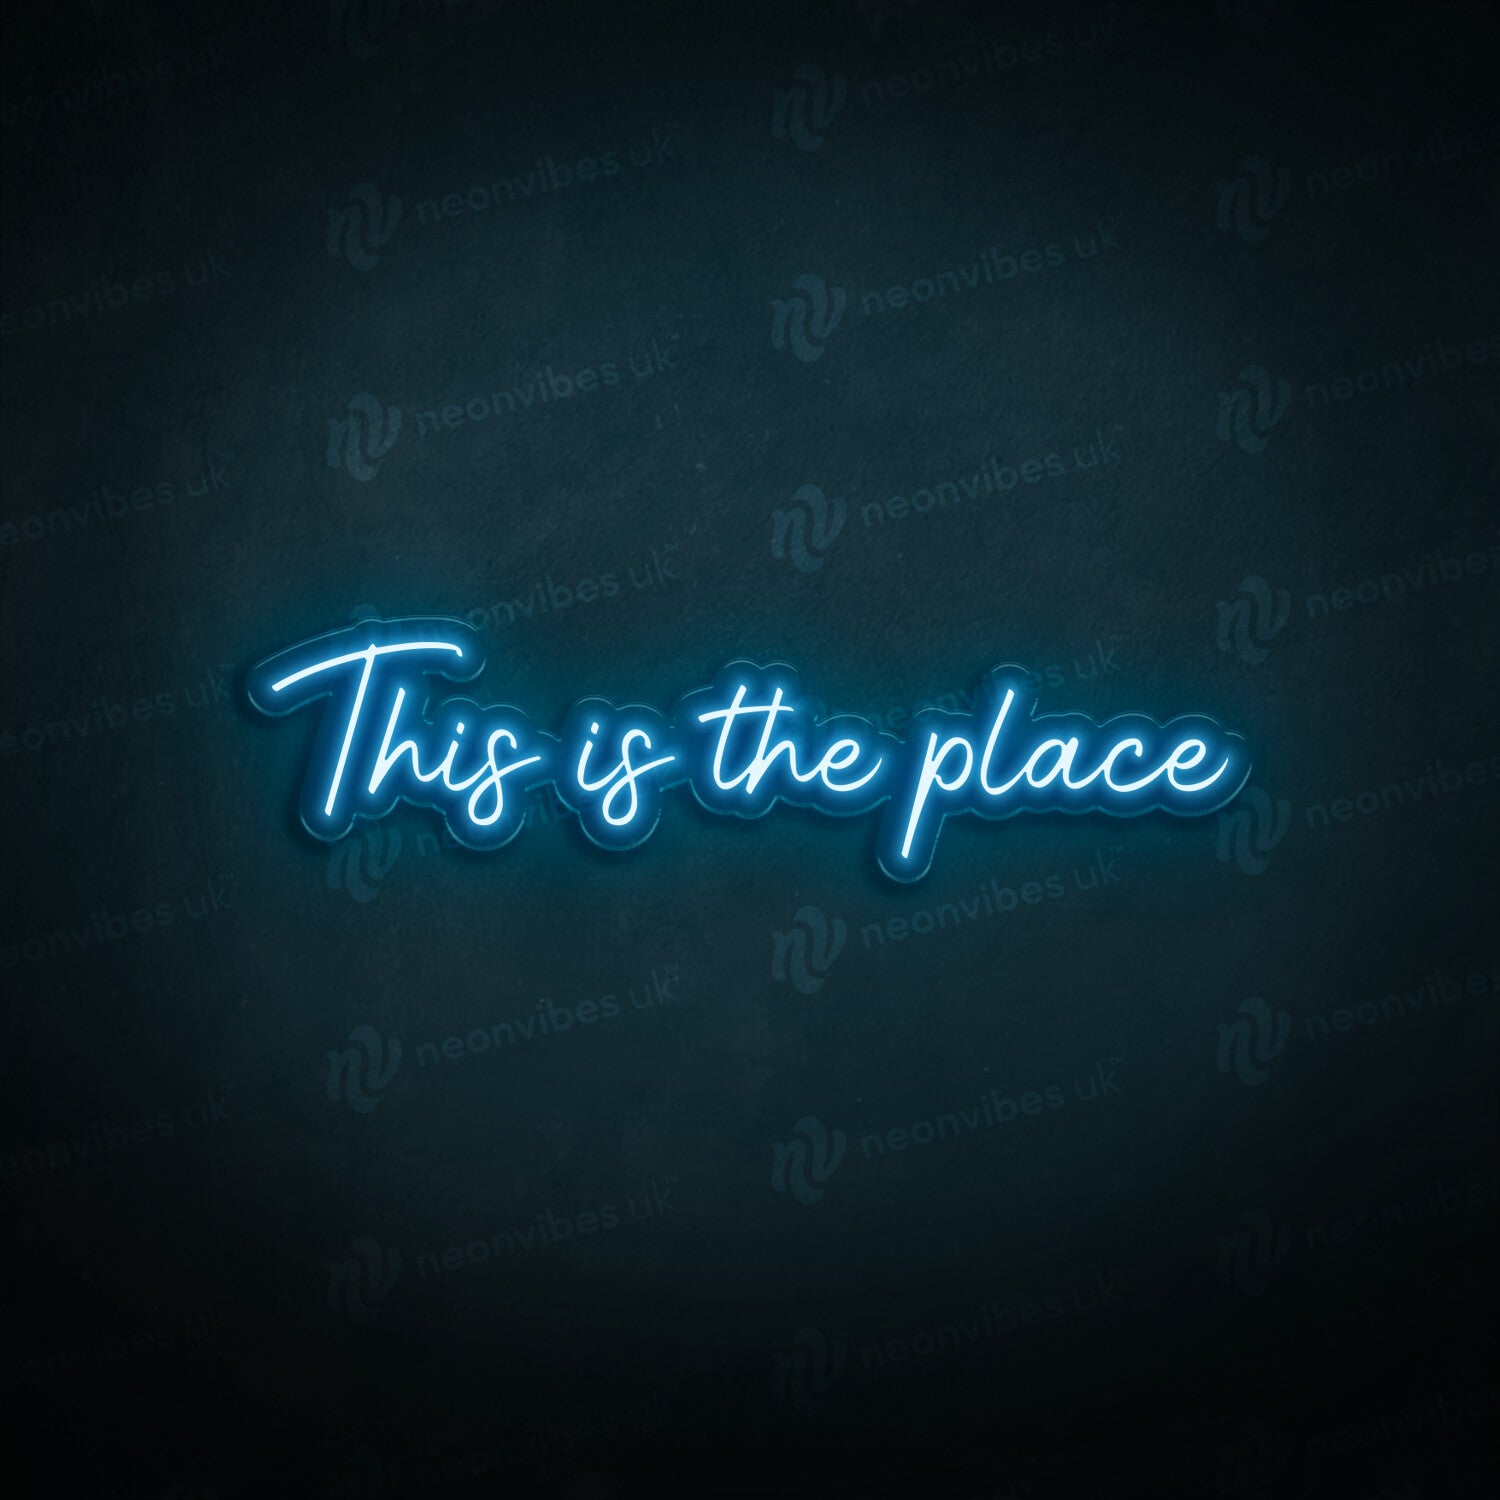 This is the place neon sign